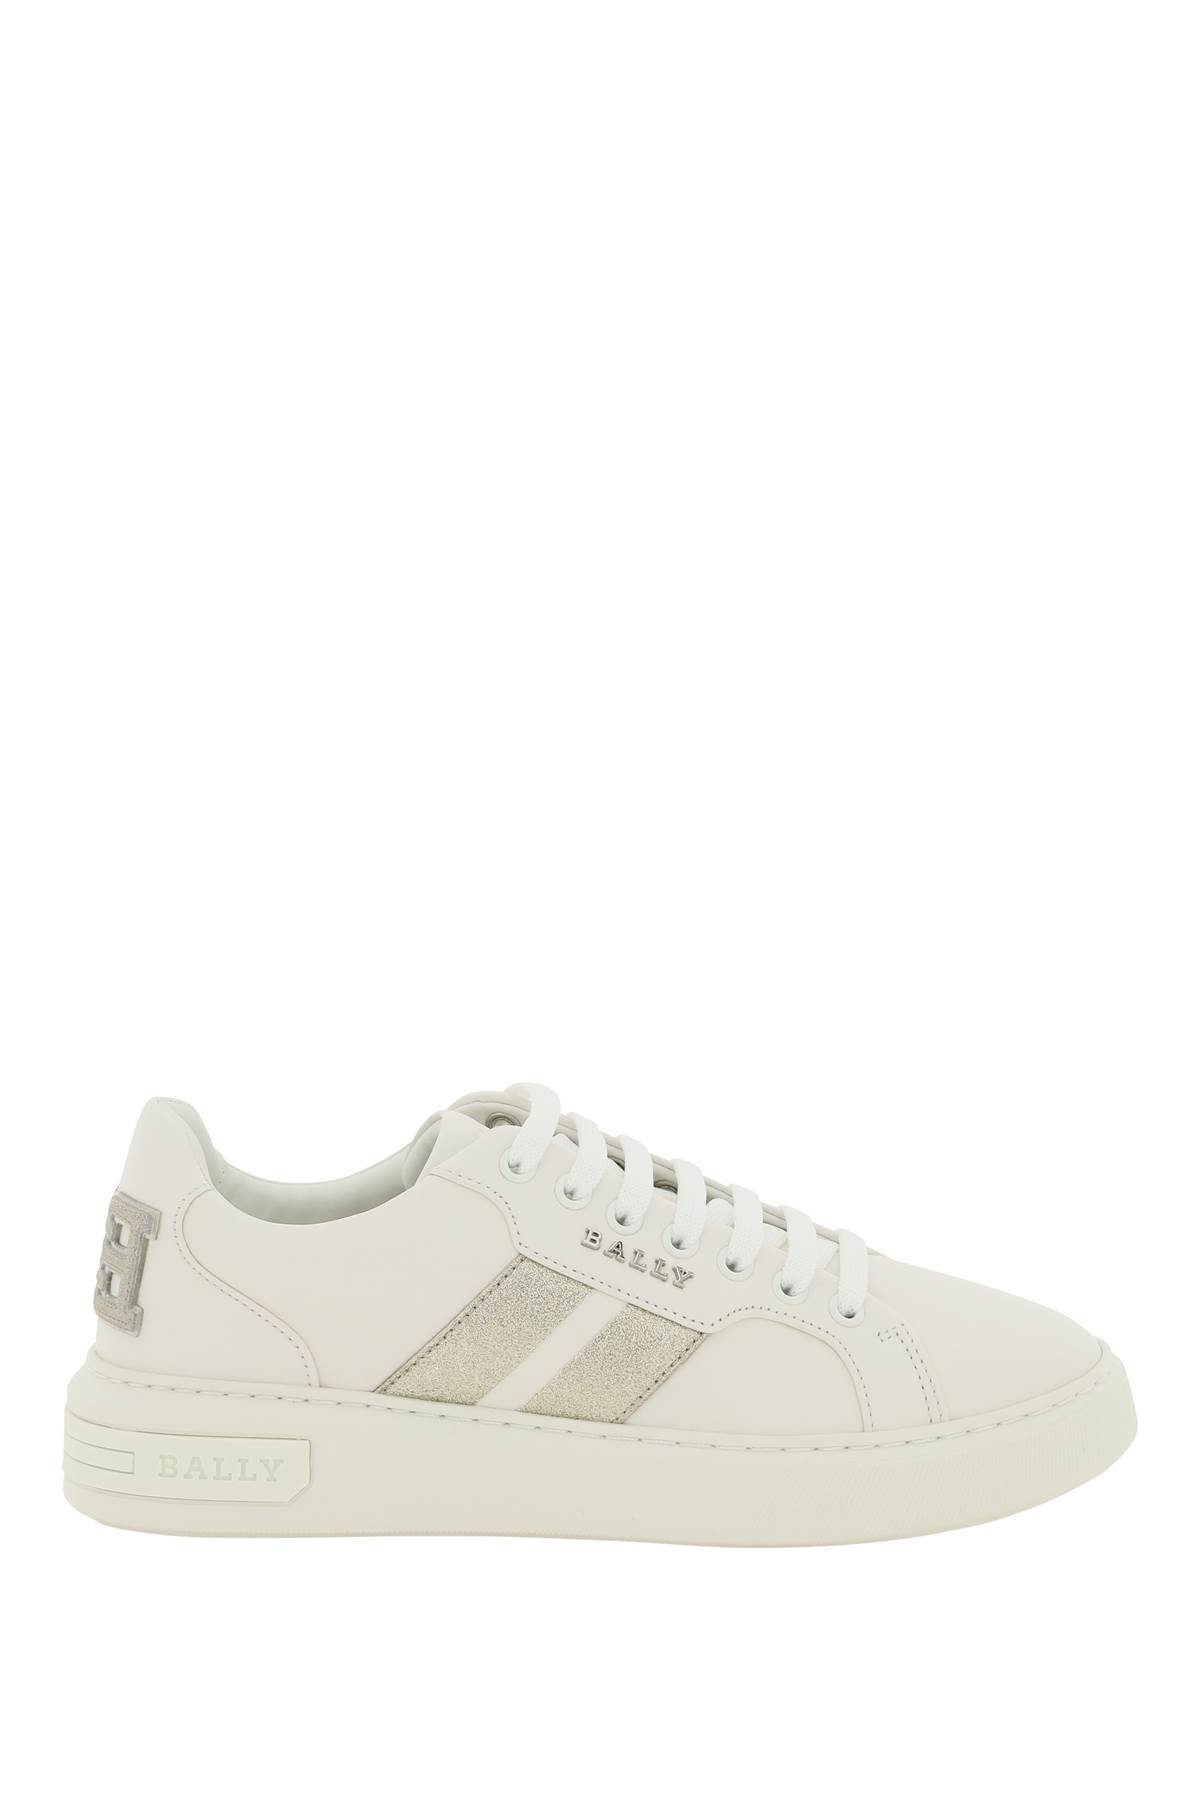 Bally melany-gl Leather Sneakers